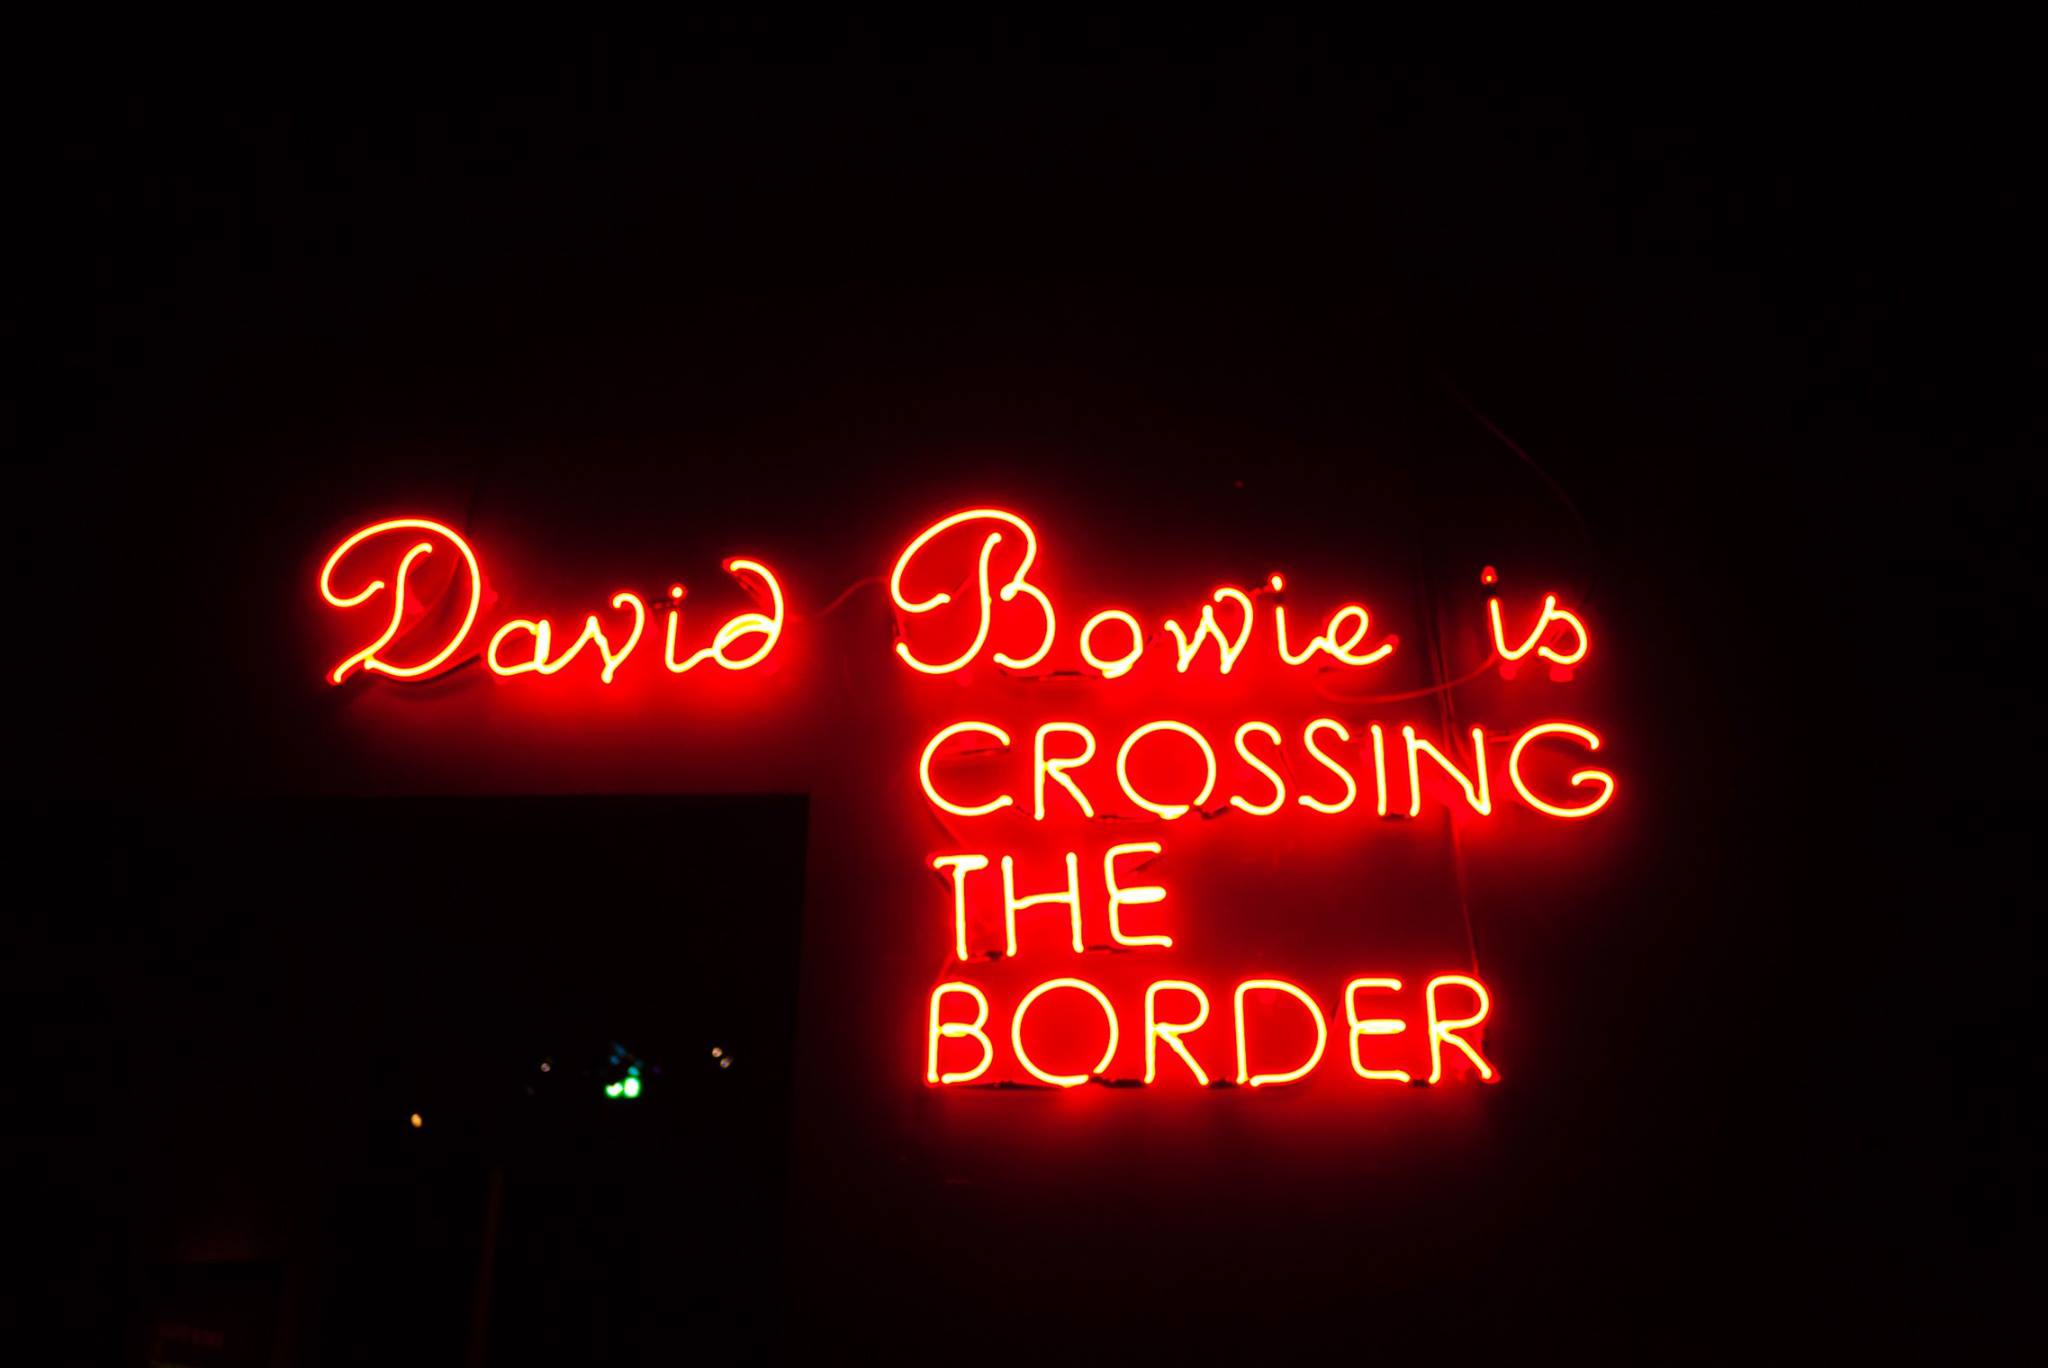 The stars look very different today: a reflection on discovering David Bowie